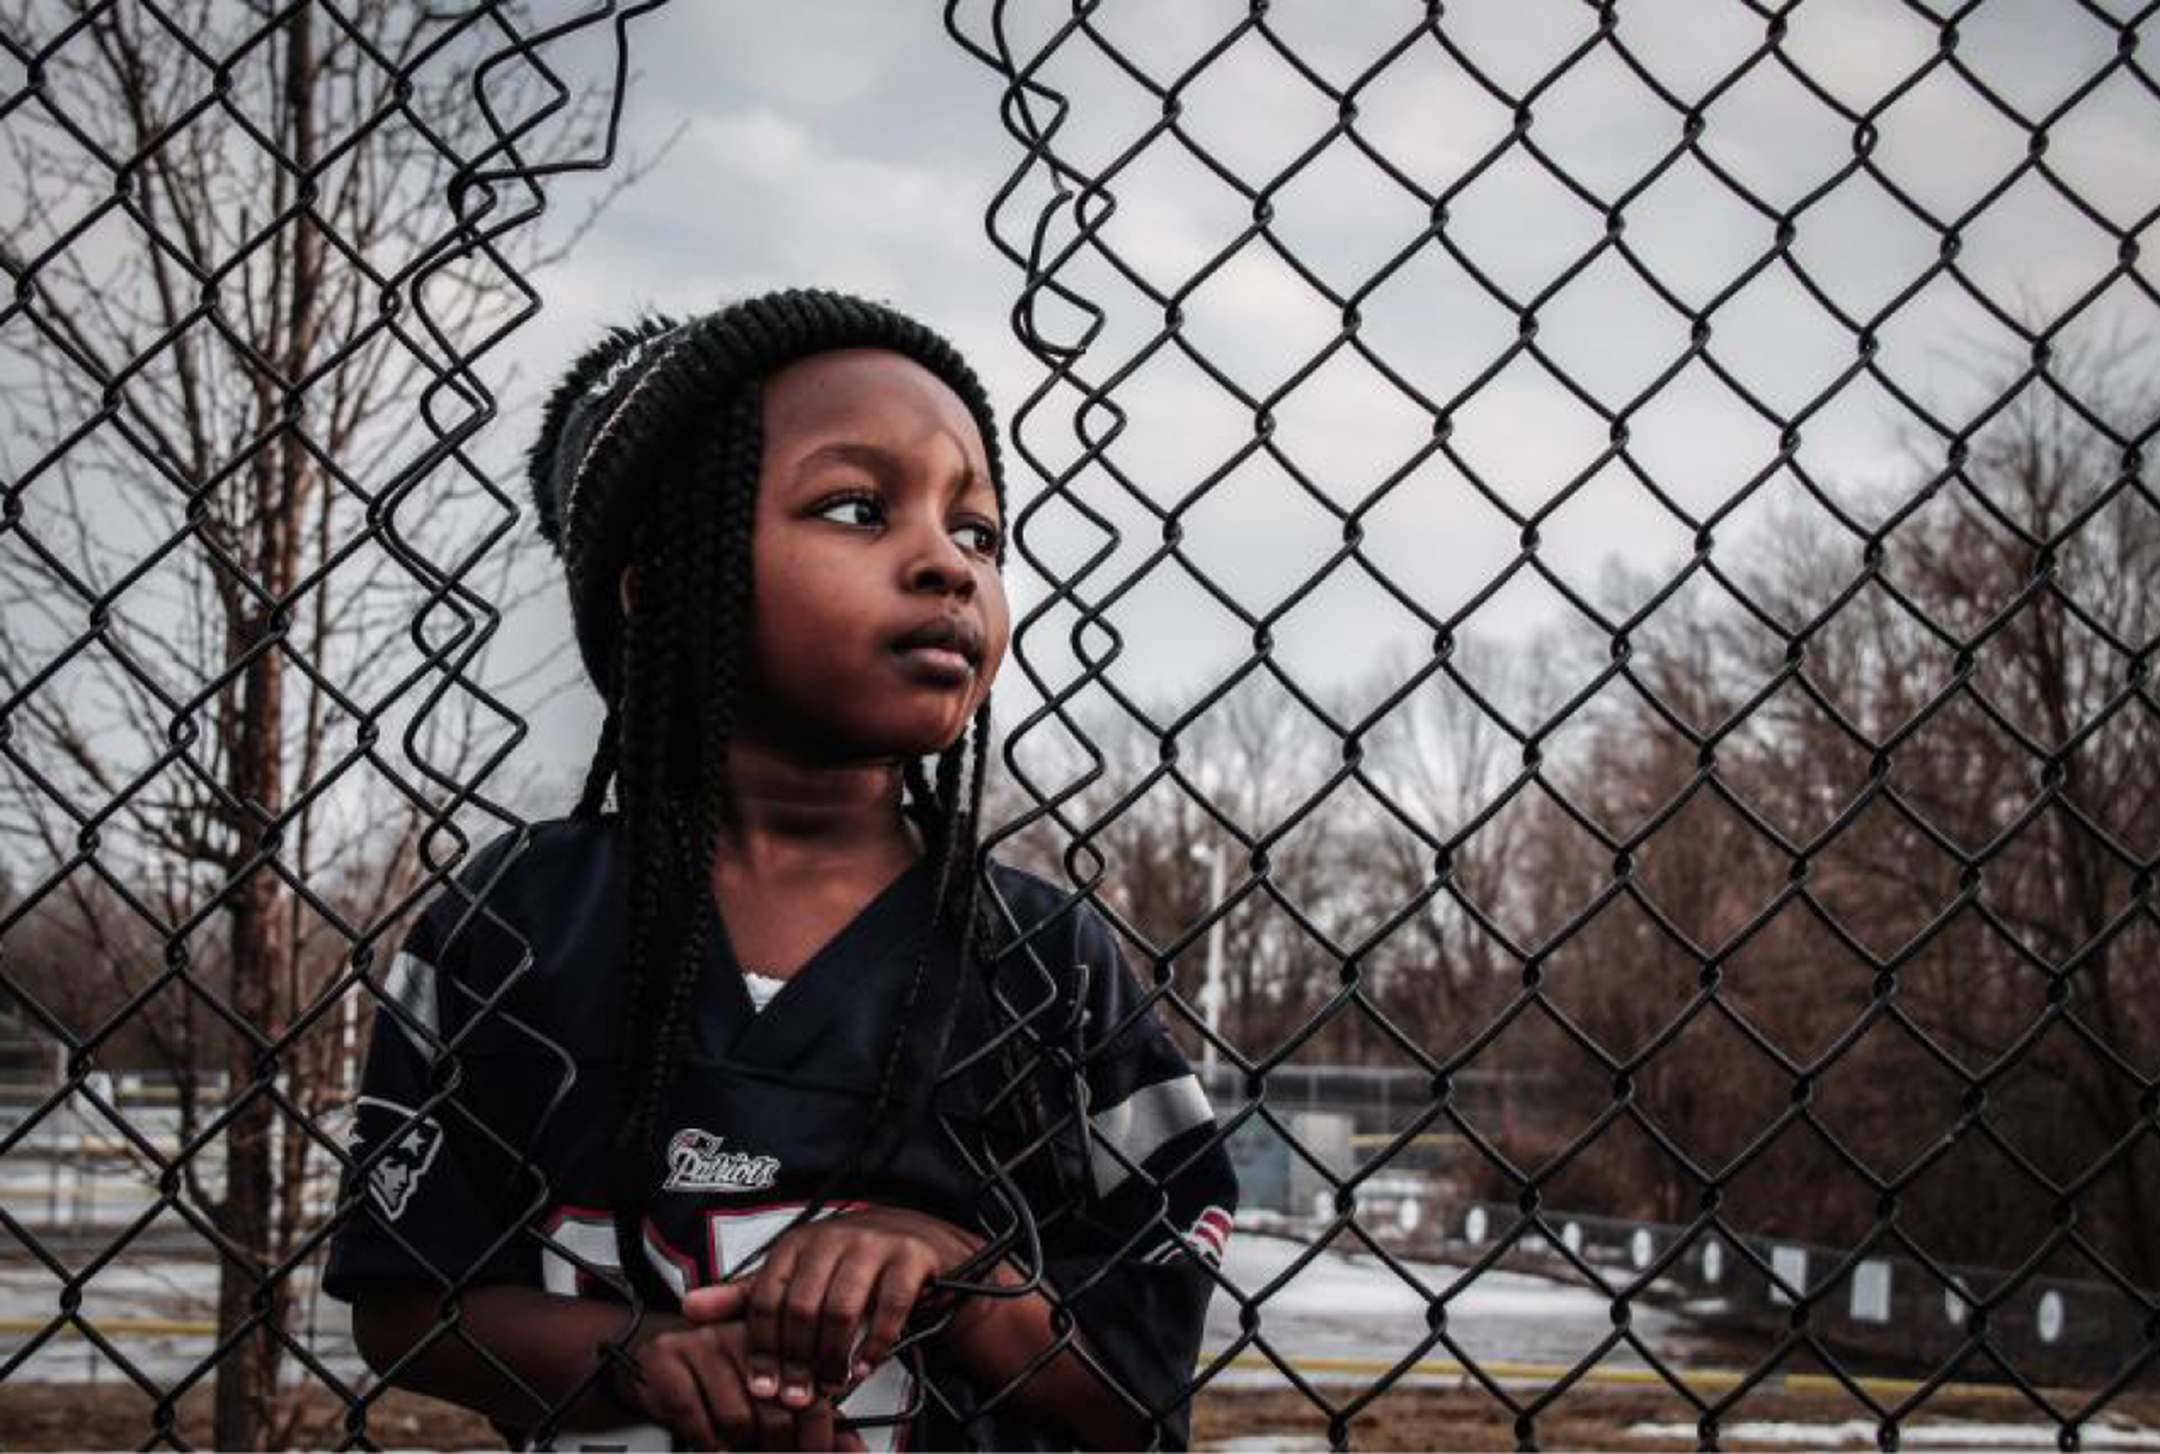 Photograph of a young black girl looking through a hole in a fence